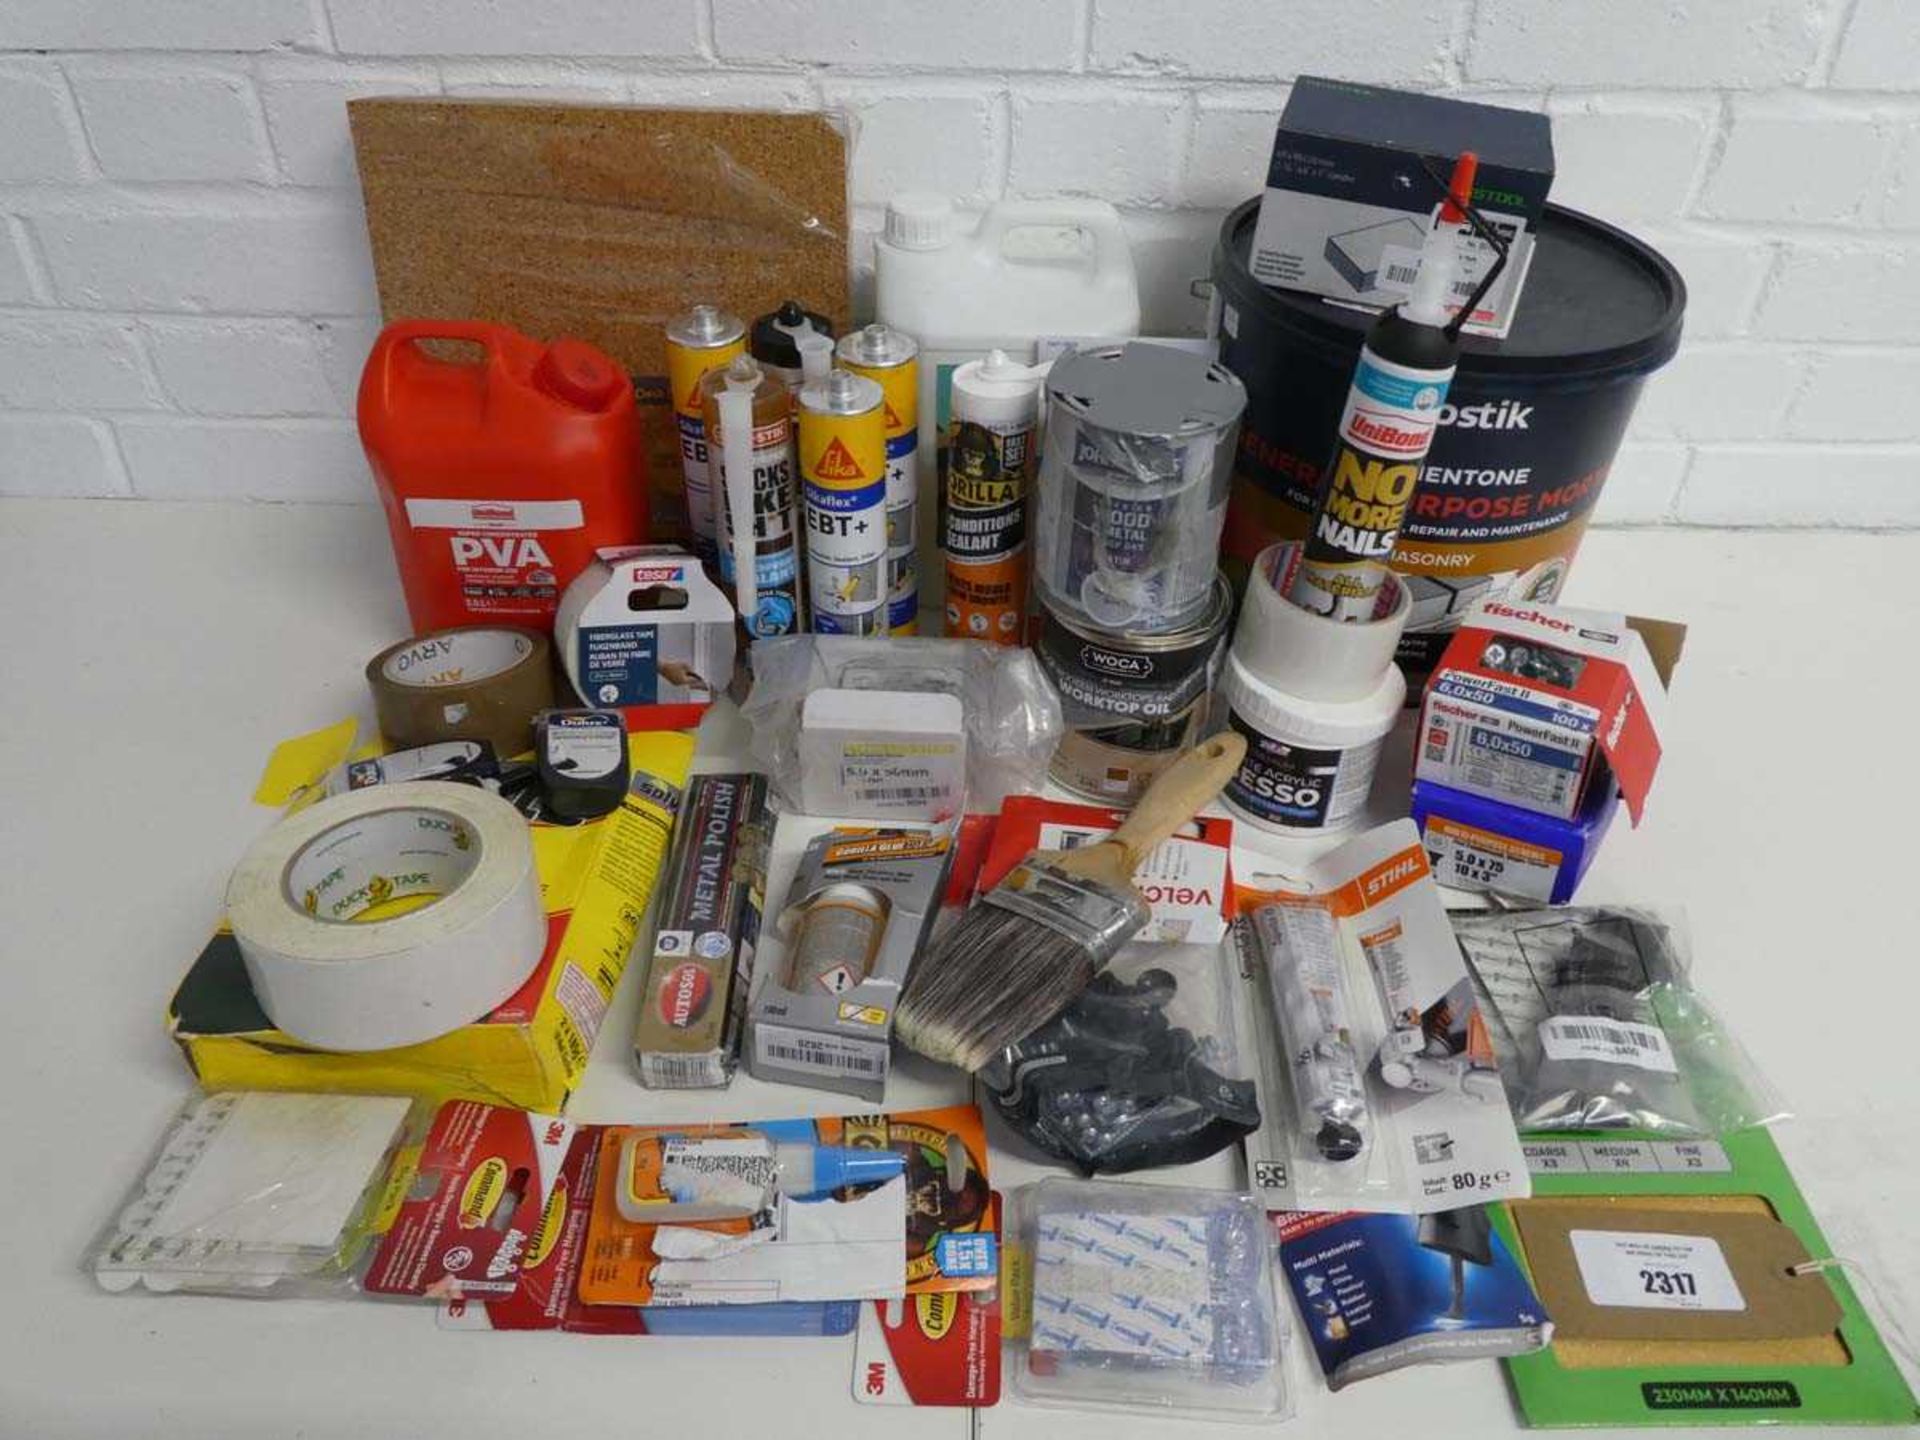 +VAT Large quantity of assorted adhesives, glues, fastenings and fixings incl. 5L tub of Bostik